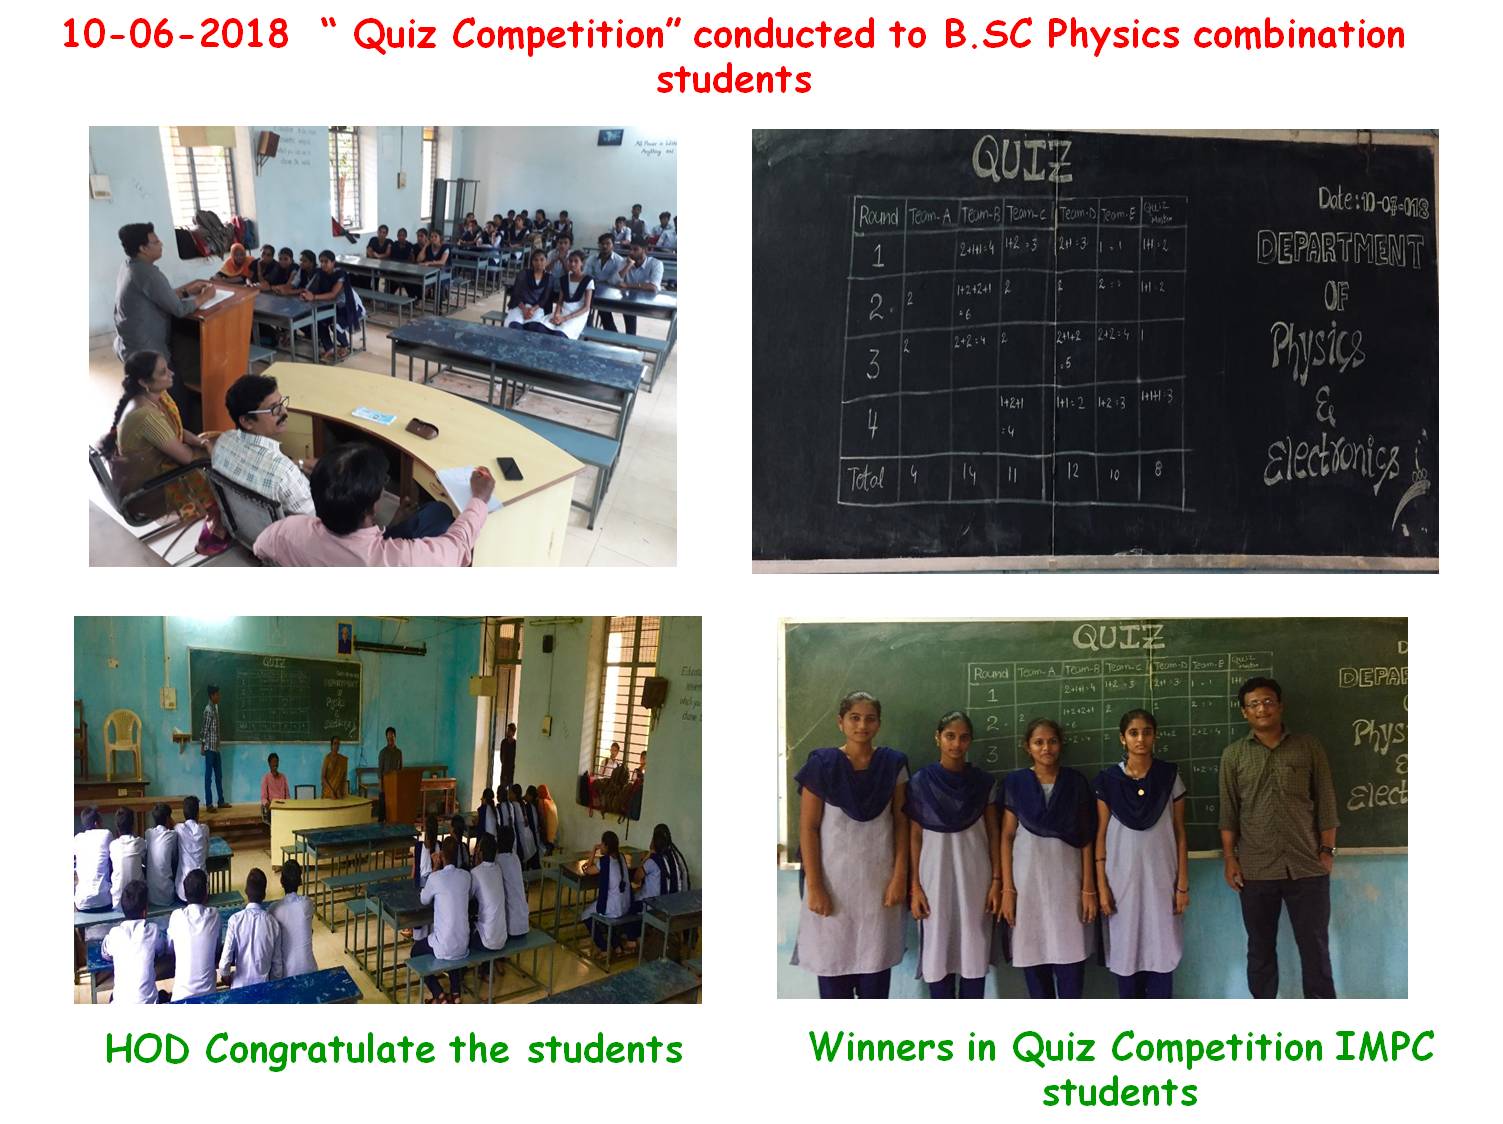 DEPARTMENT OF PHYSICS & ELECTRONICS CONDUCTED BY QUIZ COMPETITION ON 10-7-2018